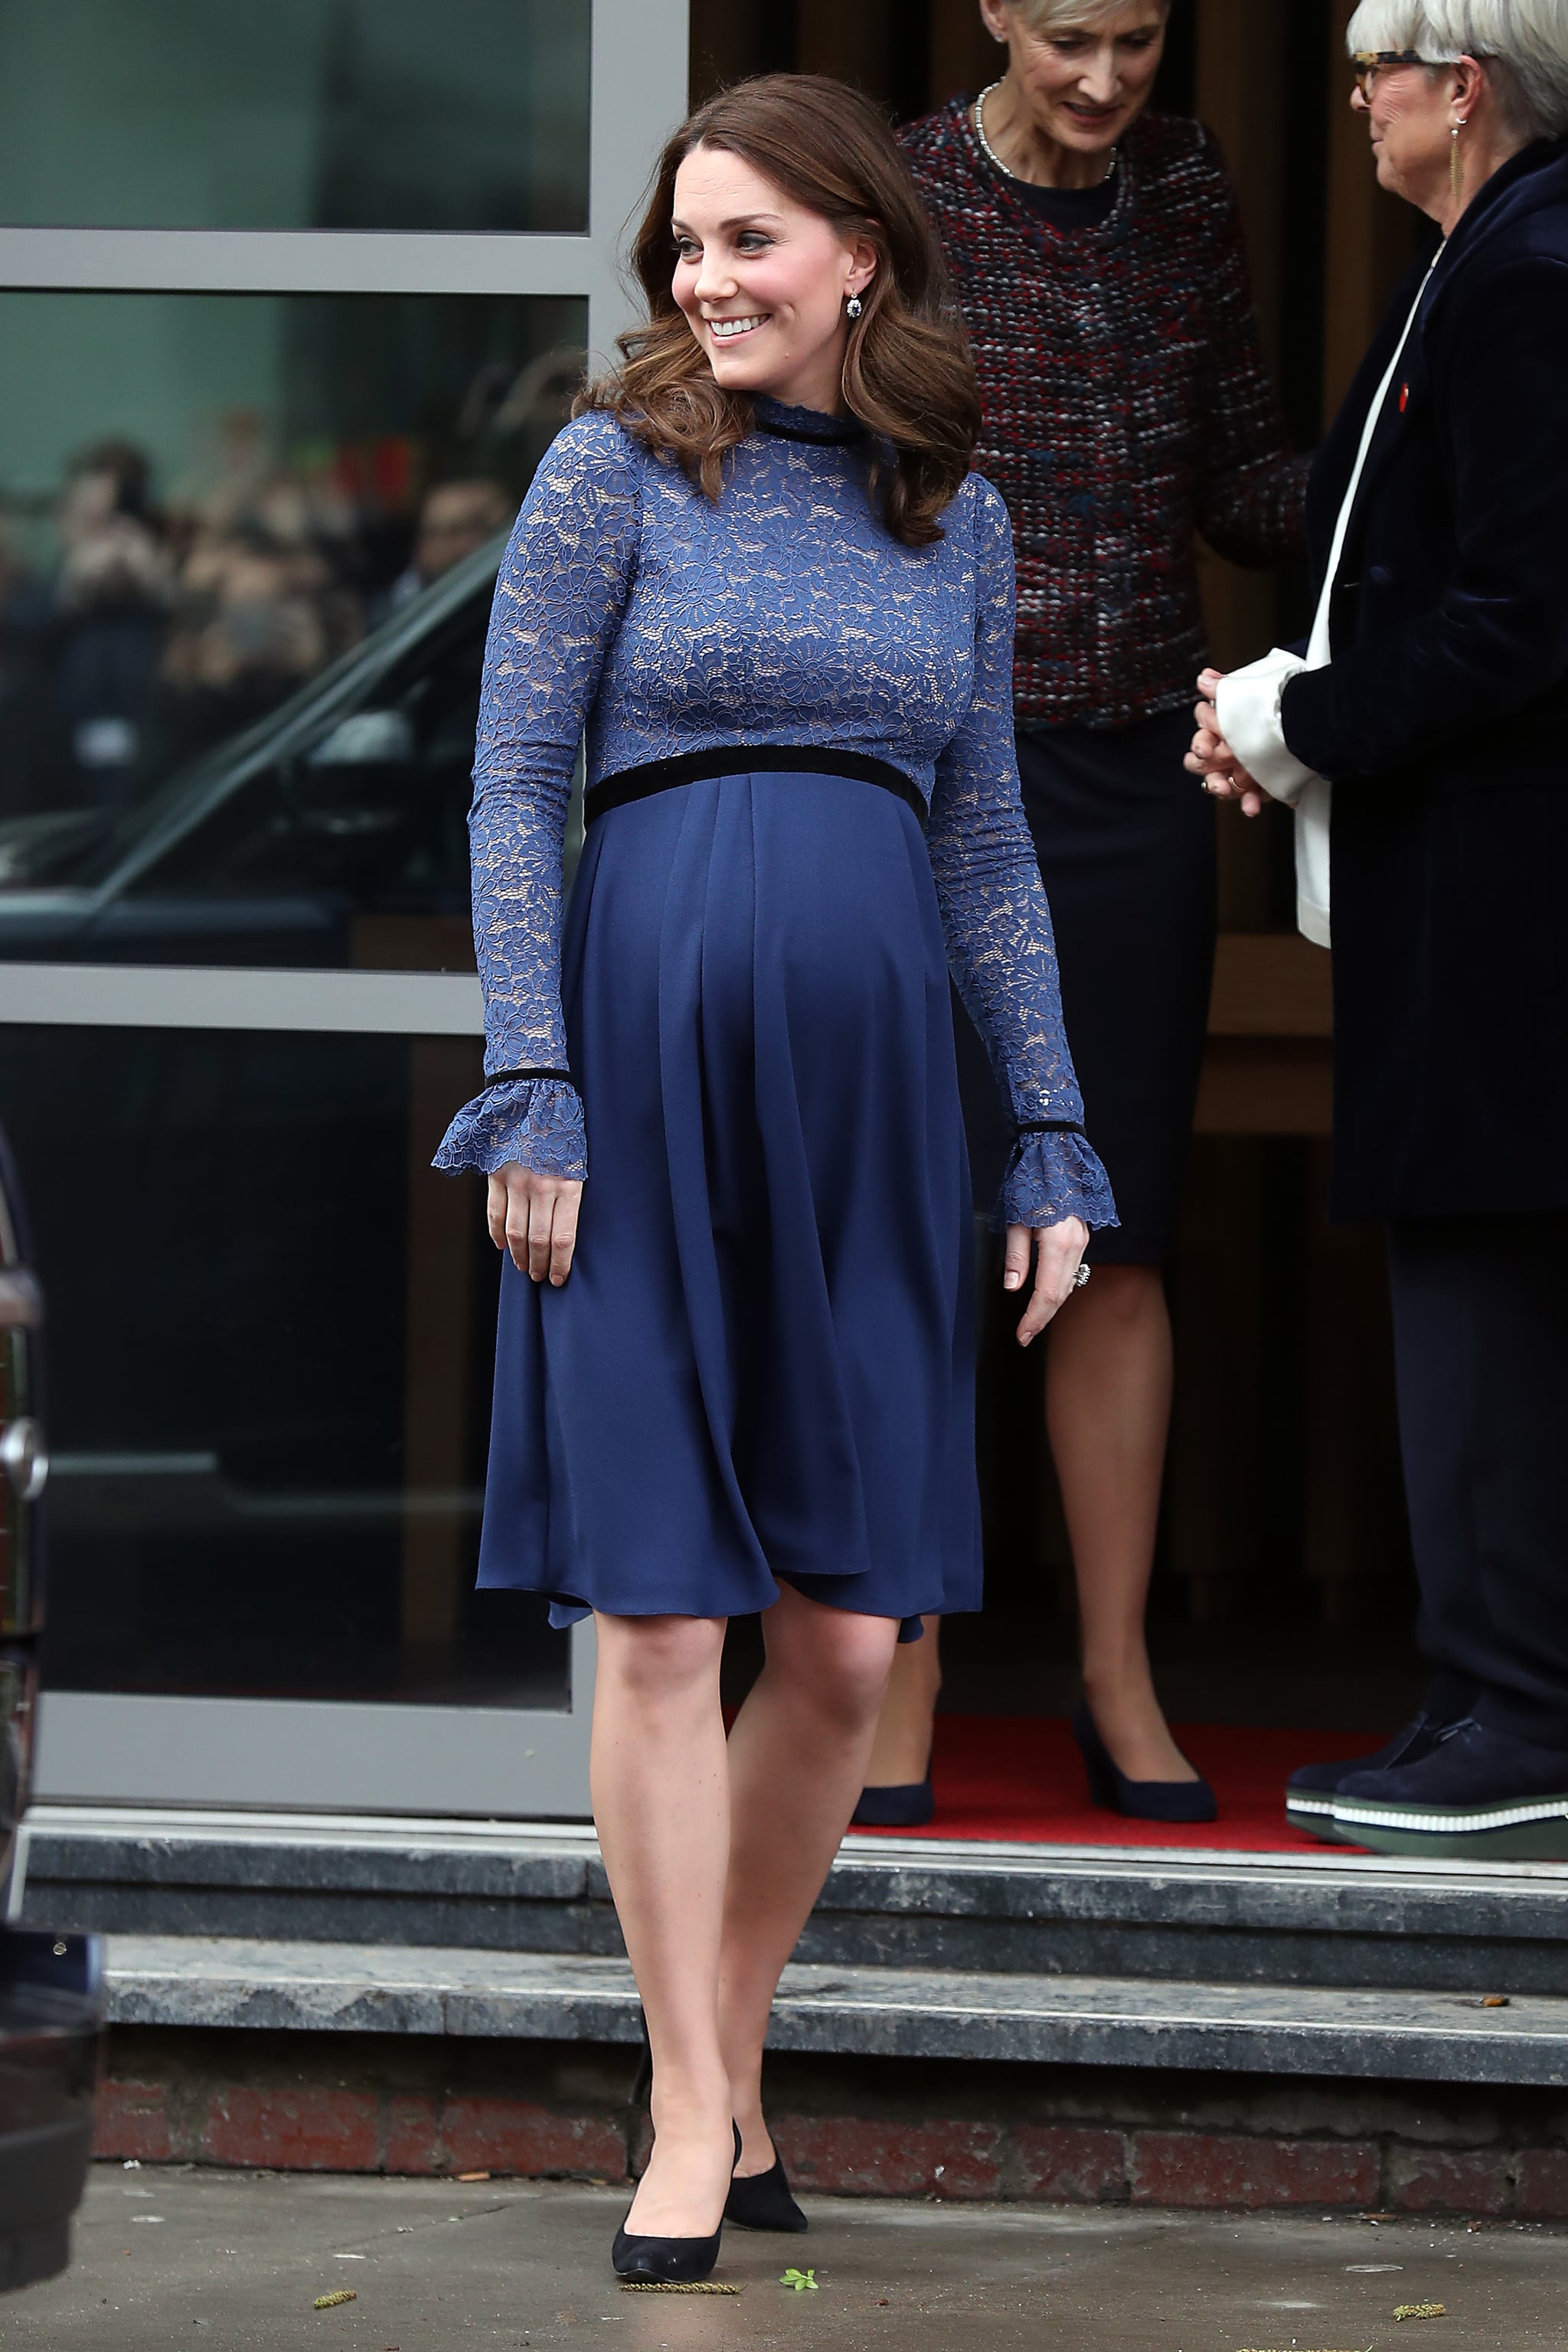 Seraphine Is the Chic Maternity Brand Royals Love